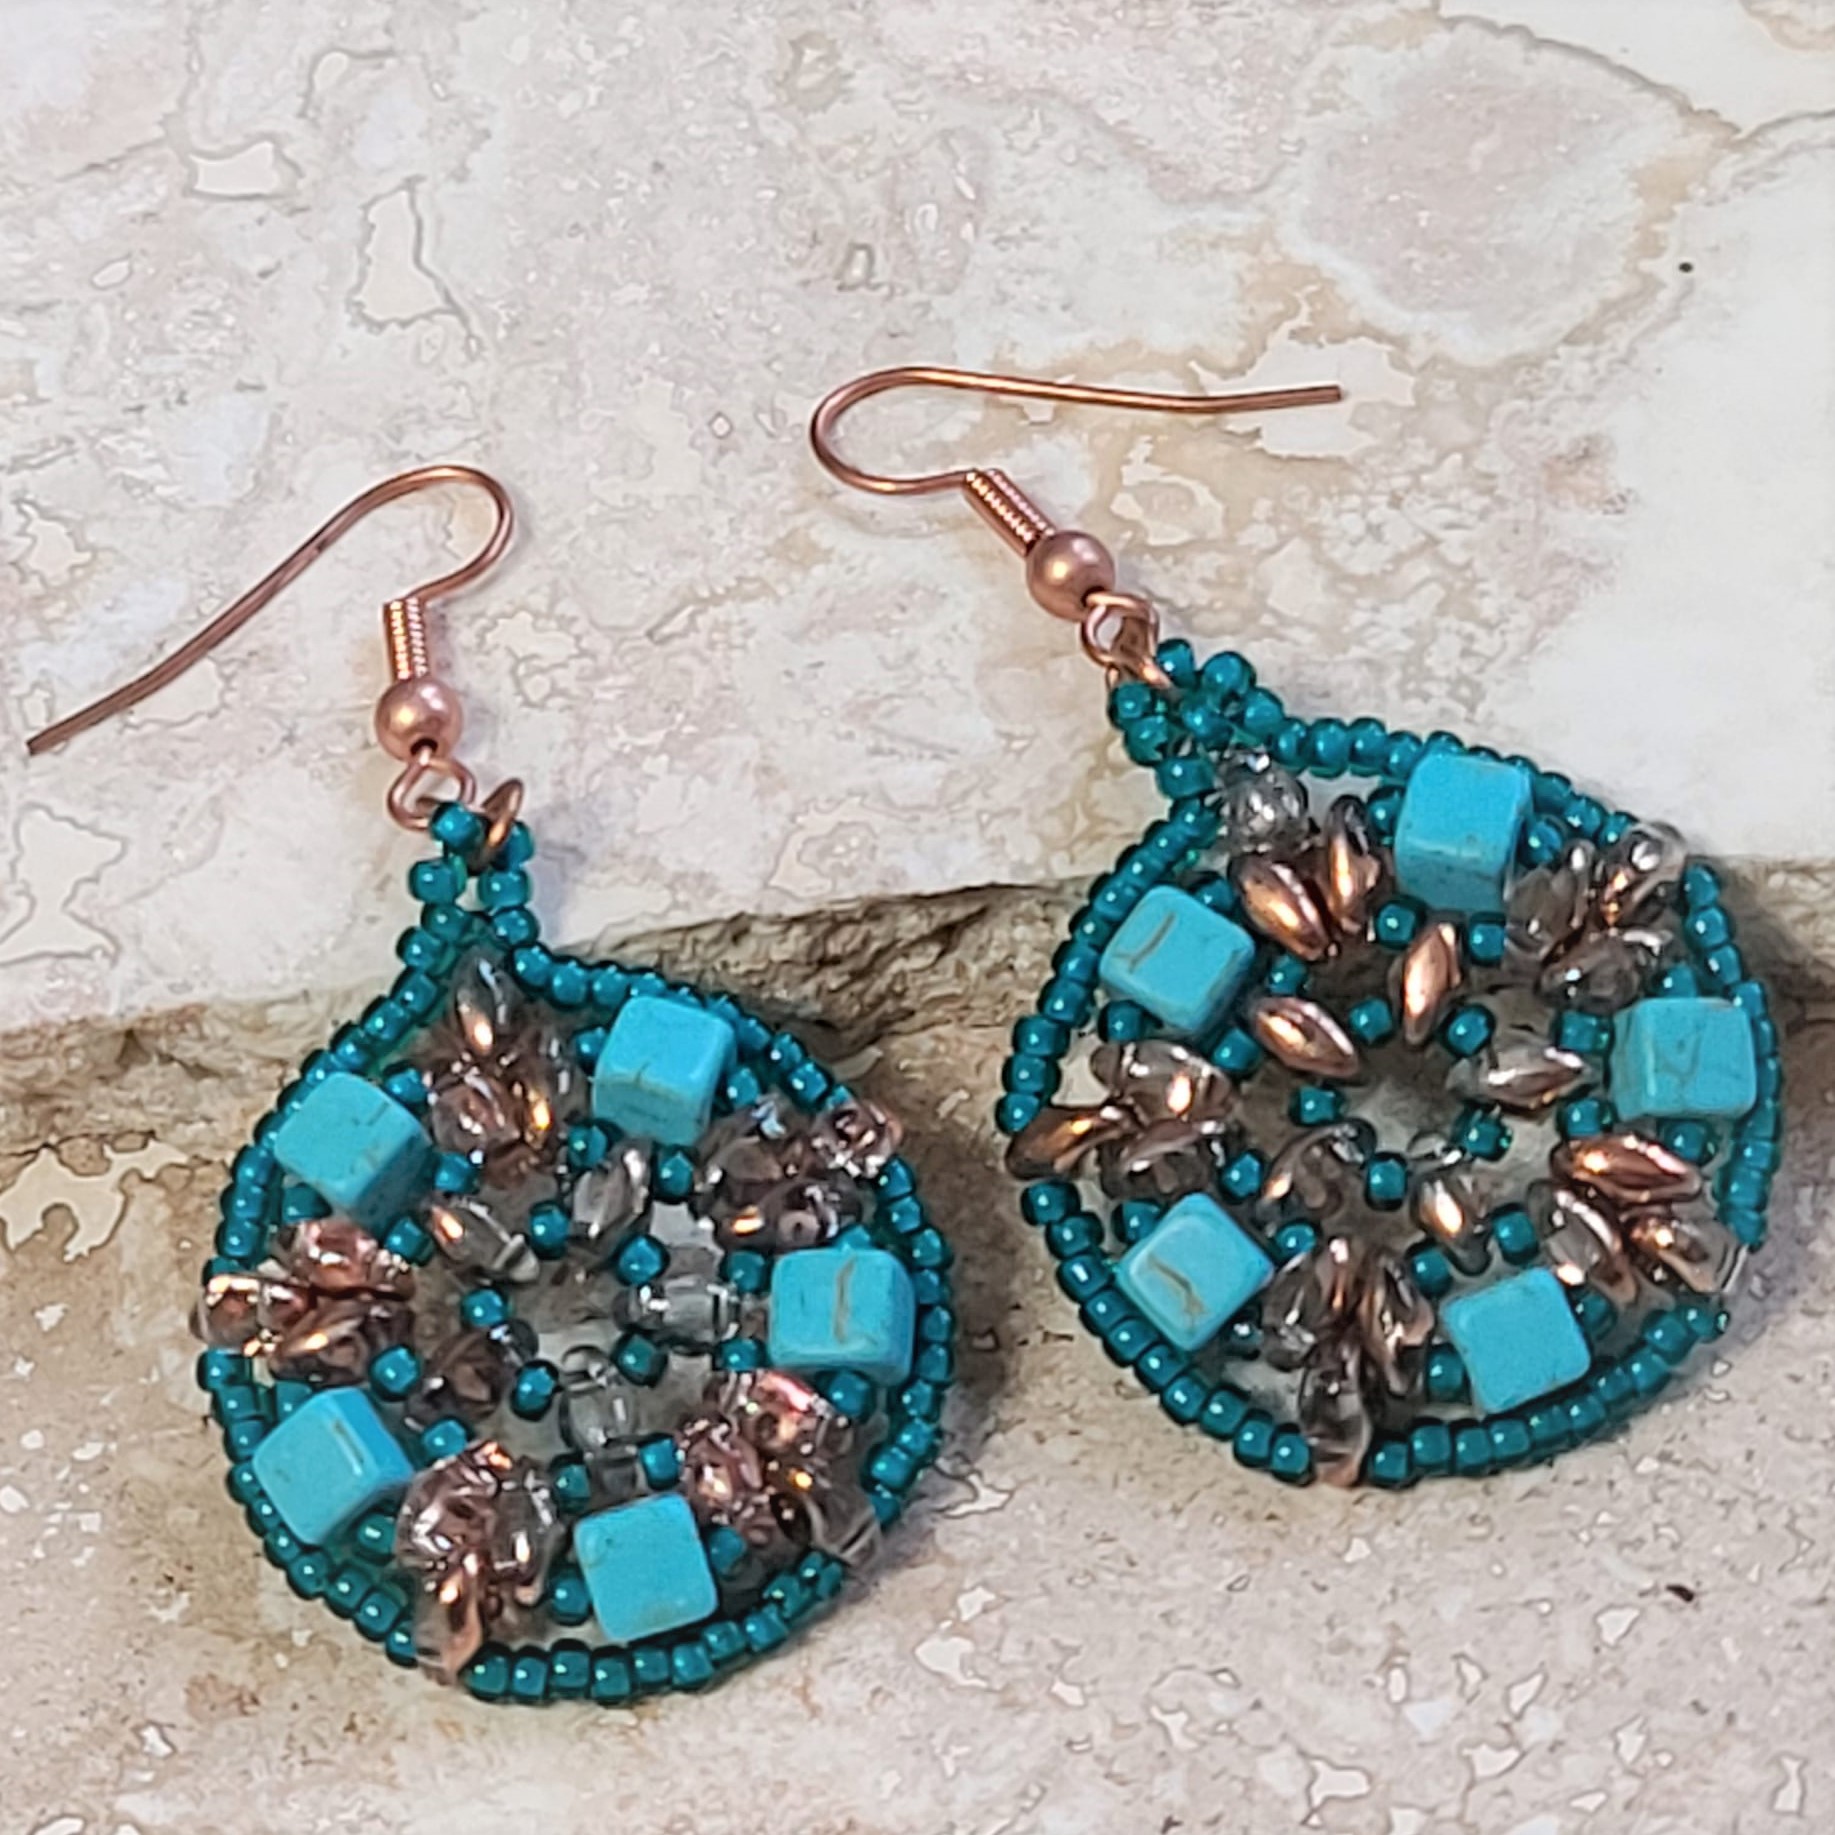 Turquoise Gemstone Medallion Handstitched Earrings - Click Image to Close